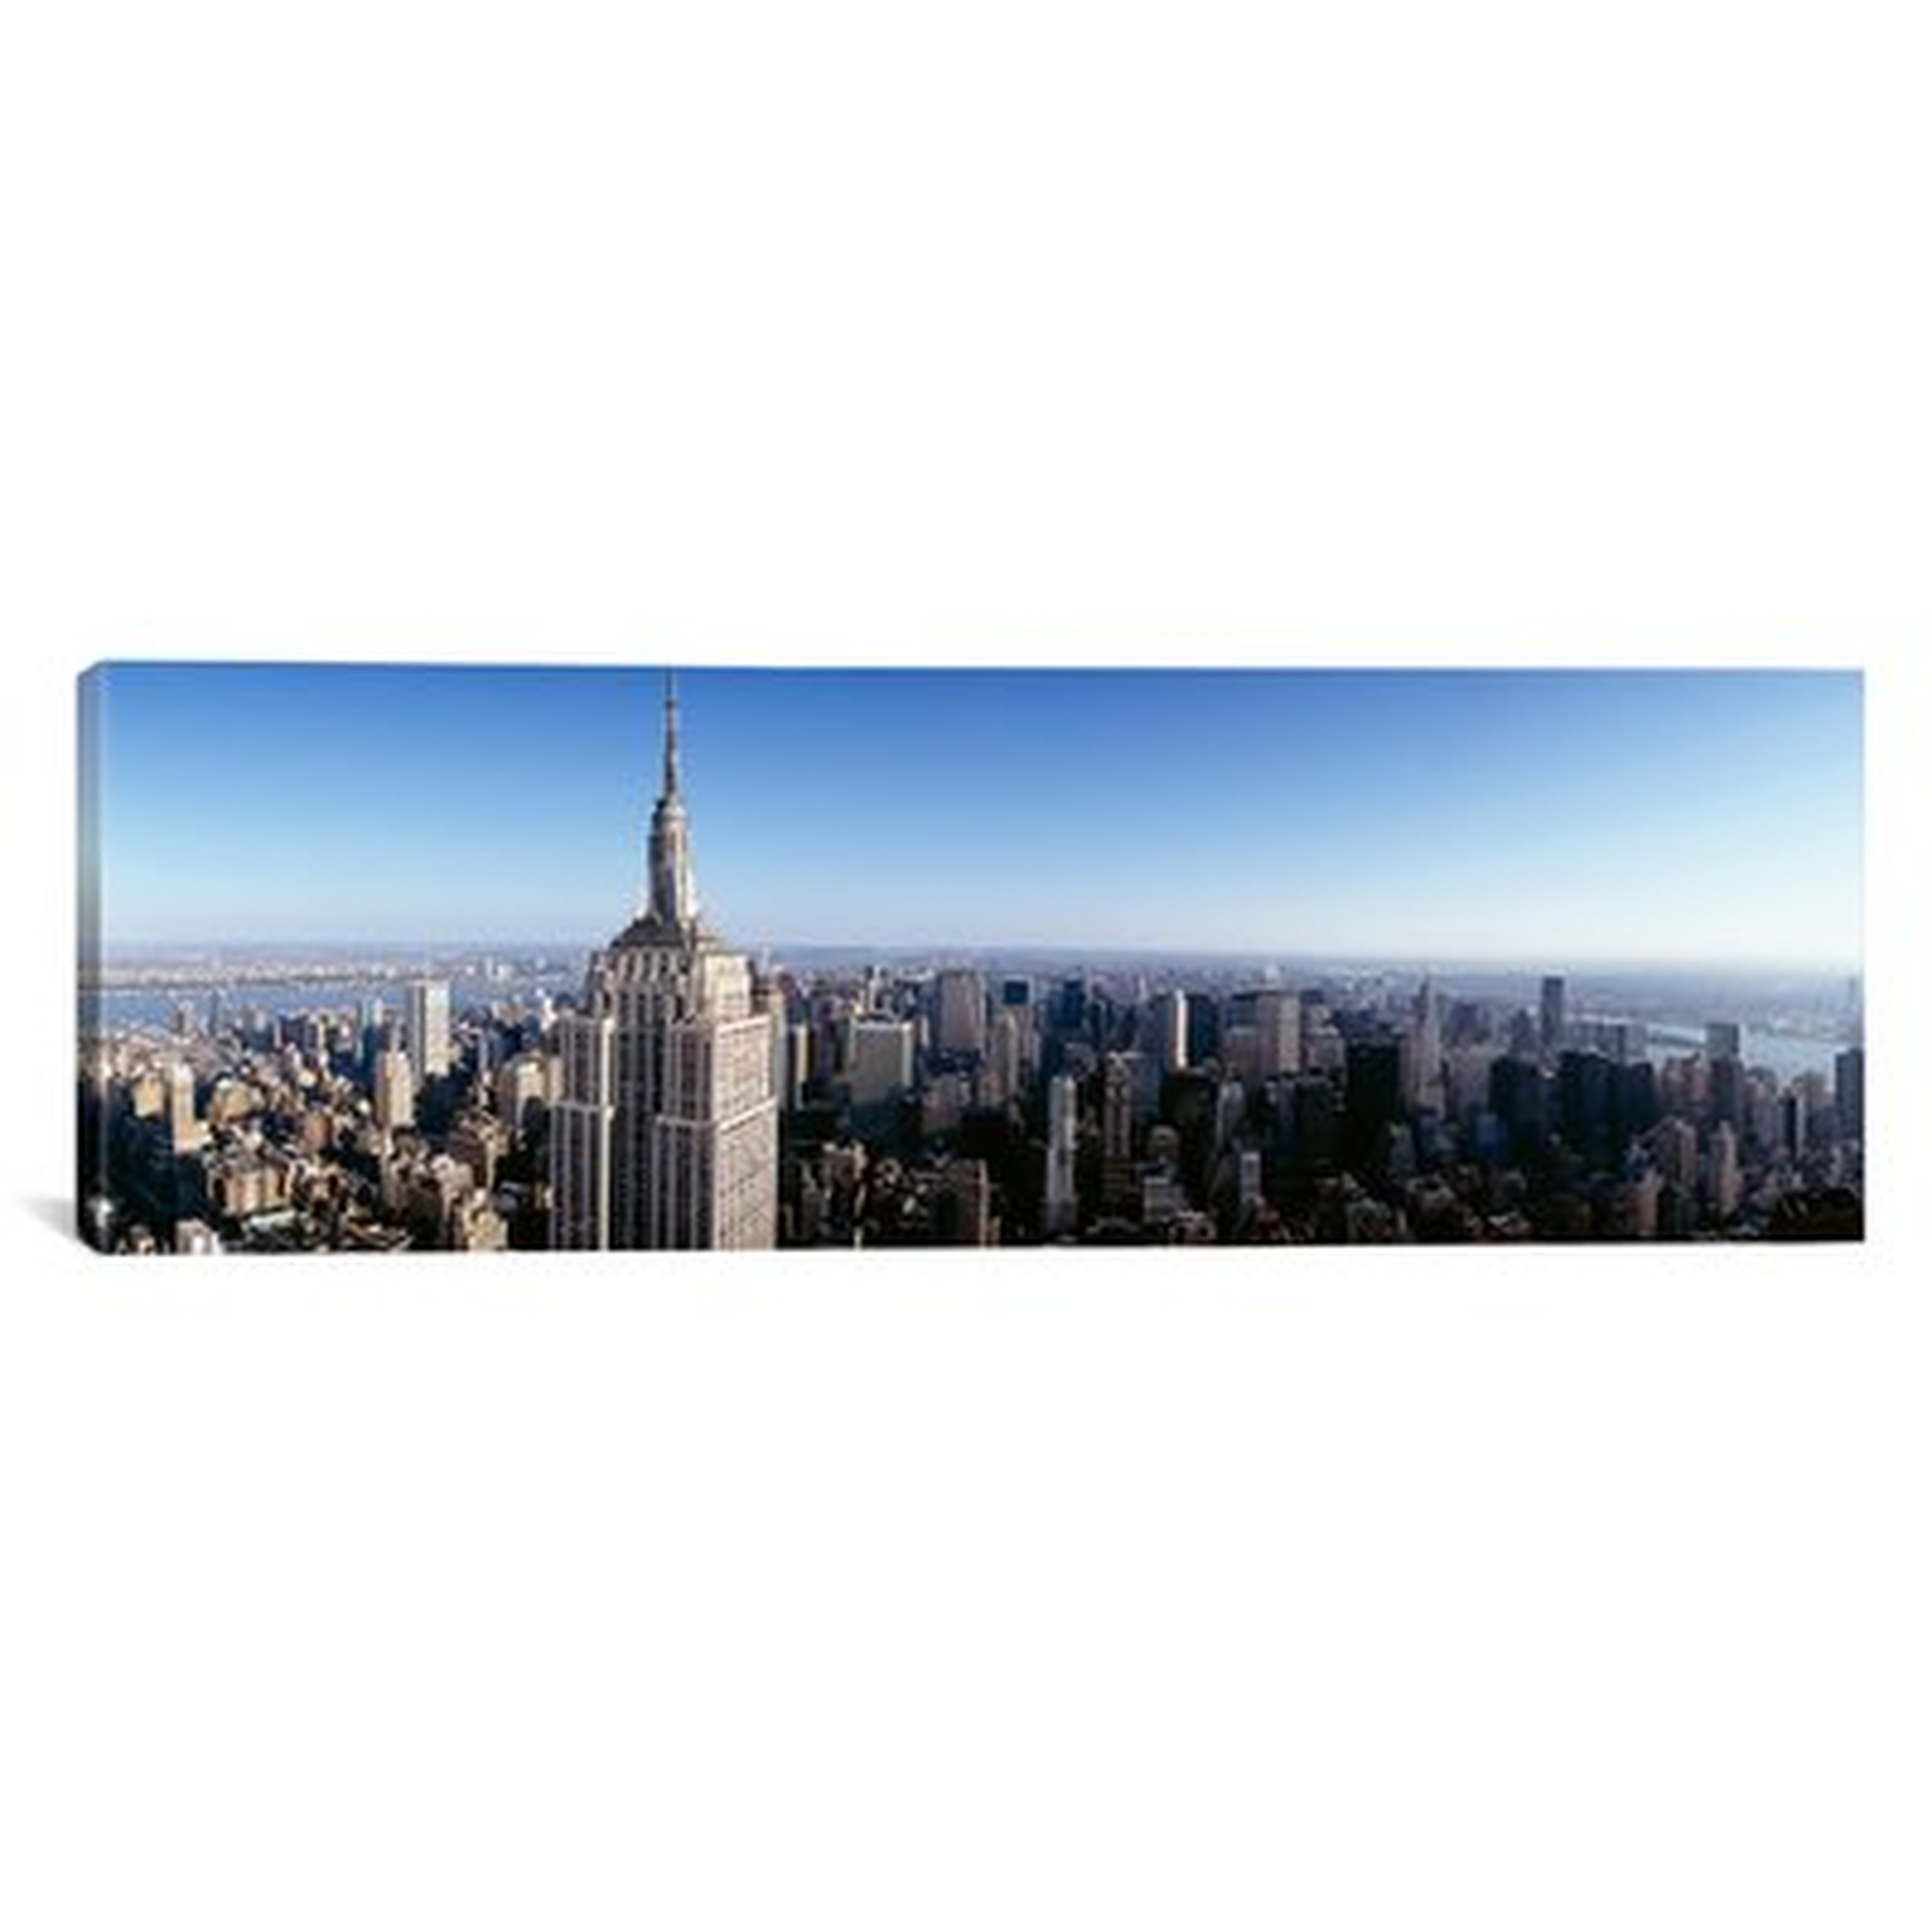 Panoramic Aerial View of a Cityscape, Empire State Building, Manhattan, New York City, New York State Photographic Print on Canvas - Wayfair